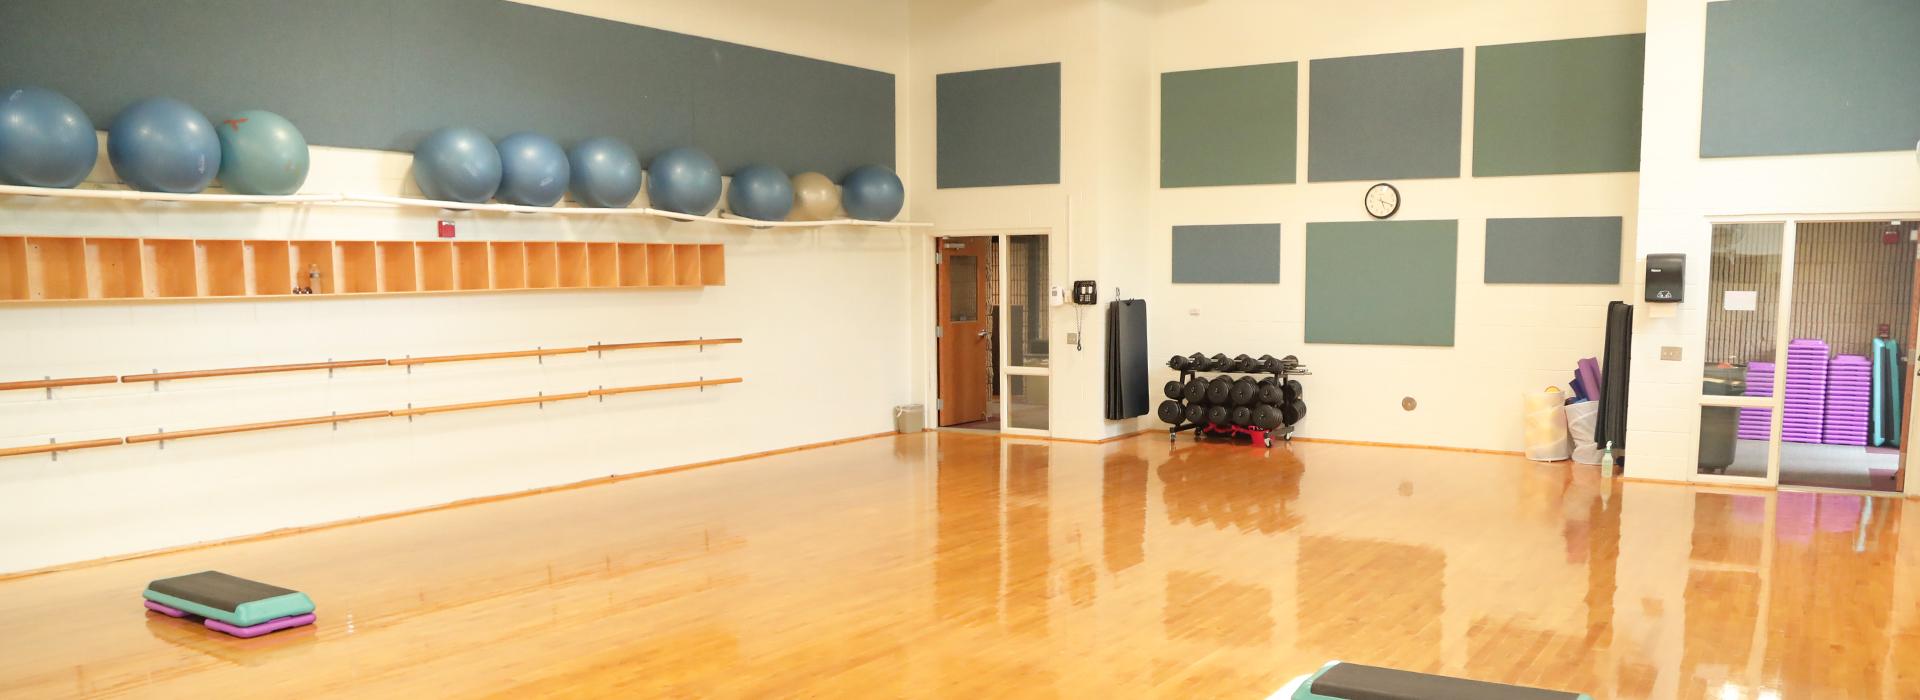 Group exercise space for fitness classes at the Portsmouth YMCA